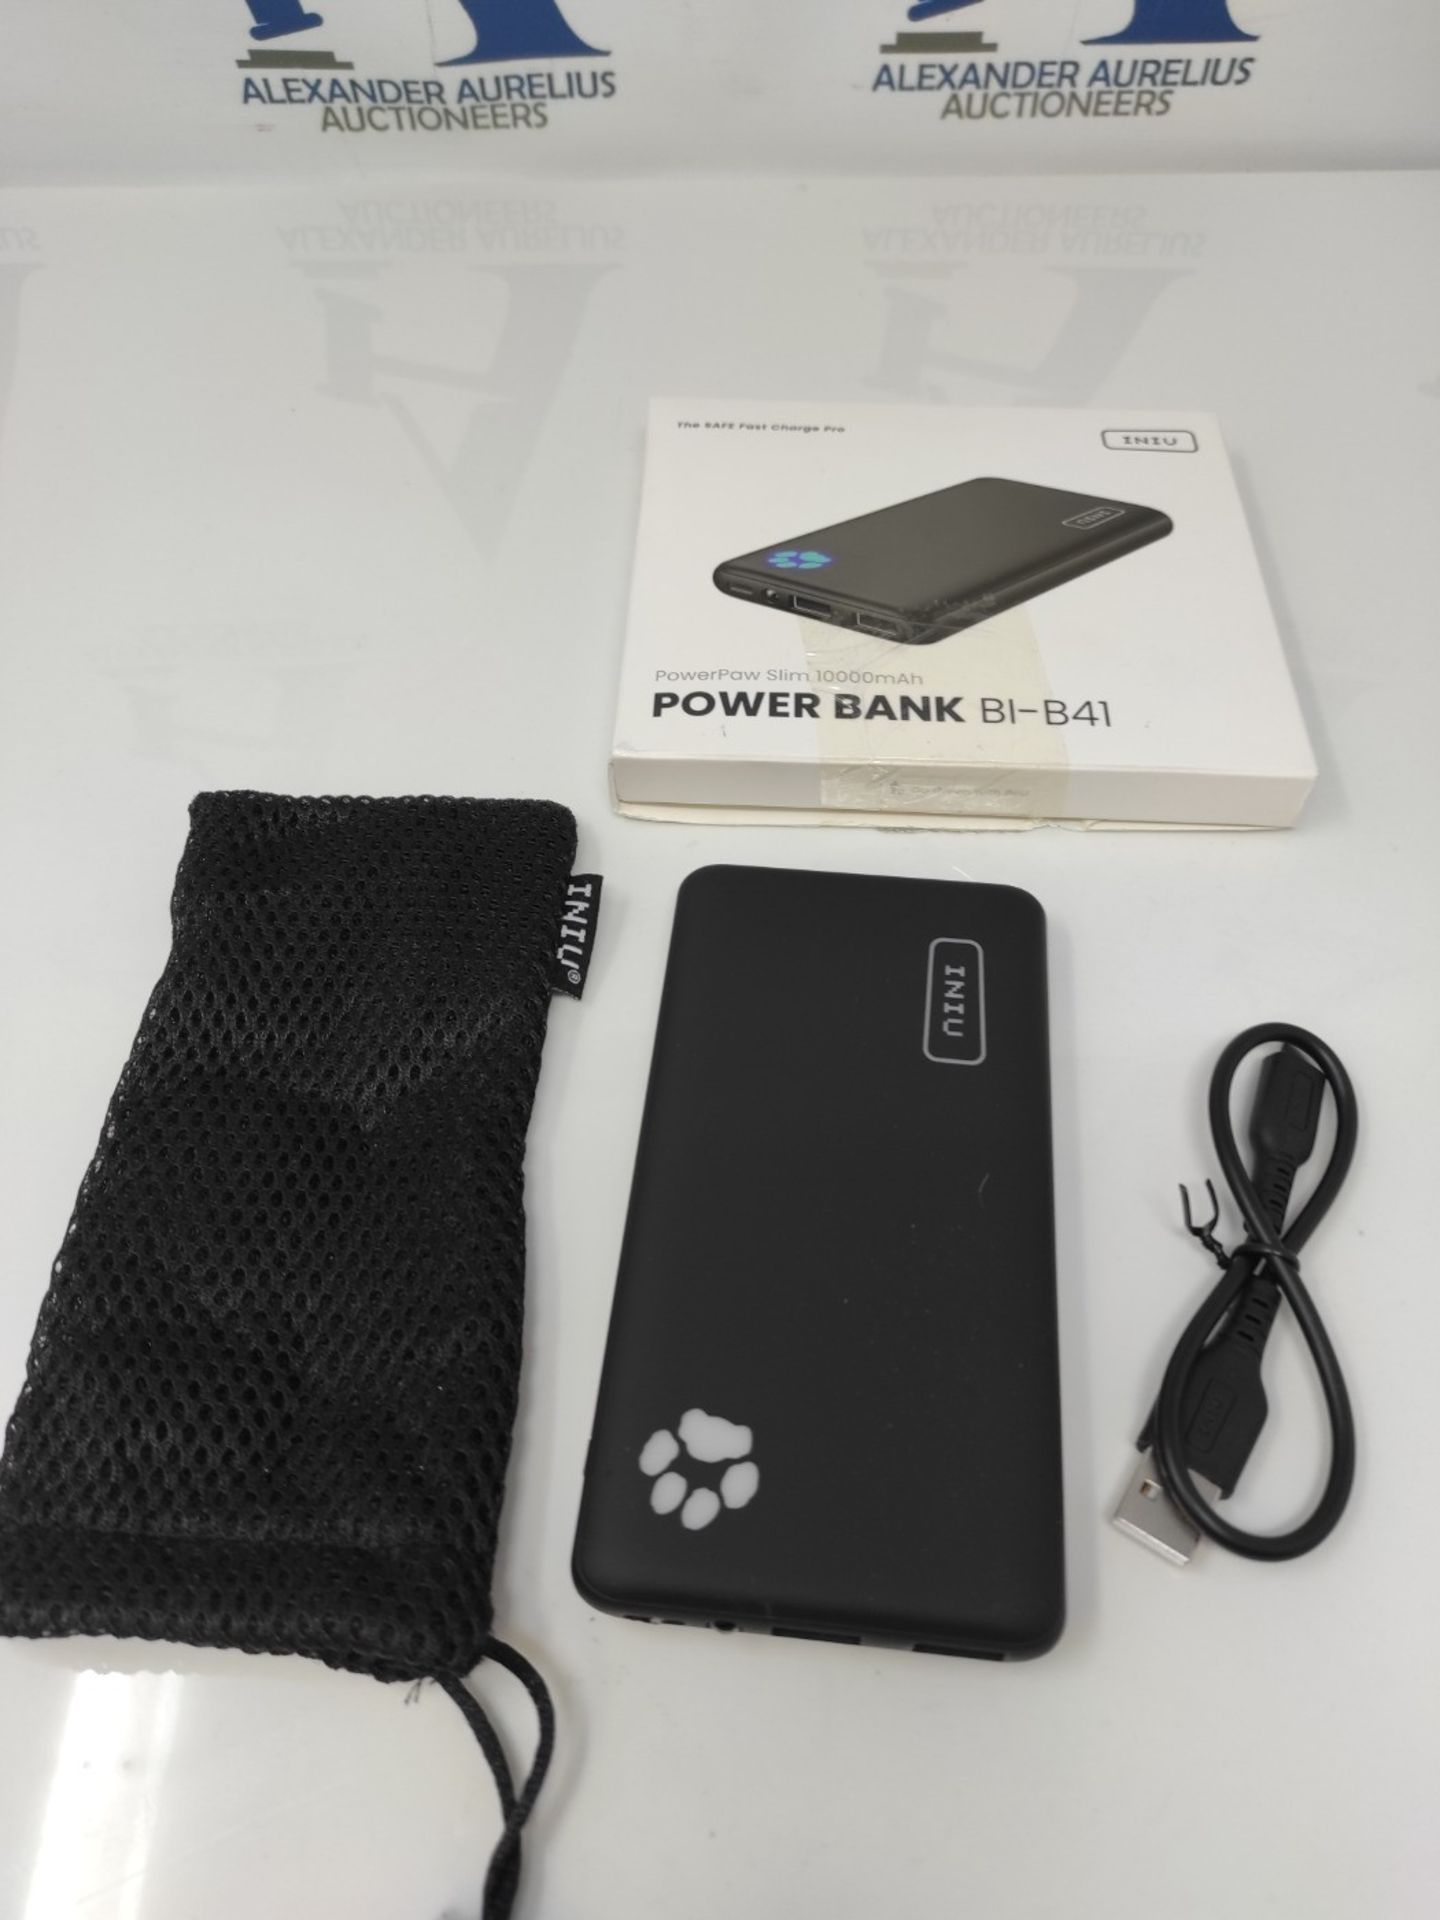 INIU Power Bank, Portable Charger 10000mAh Slimmest & Lightest High-Speed USB C Input - Image 2 of 2